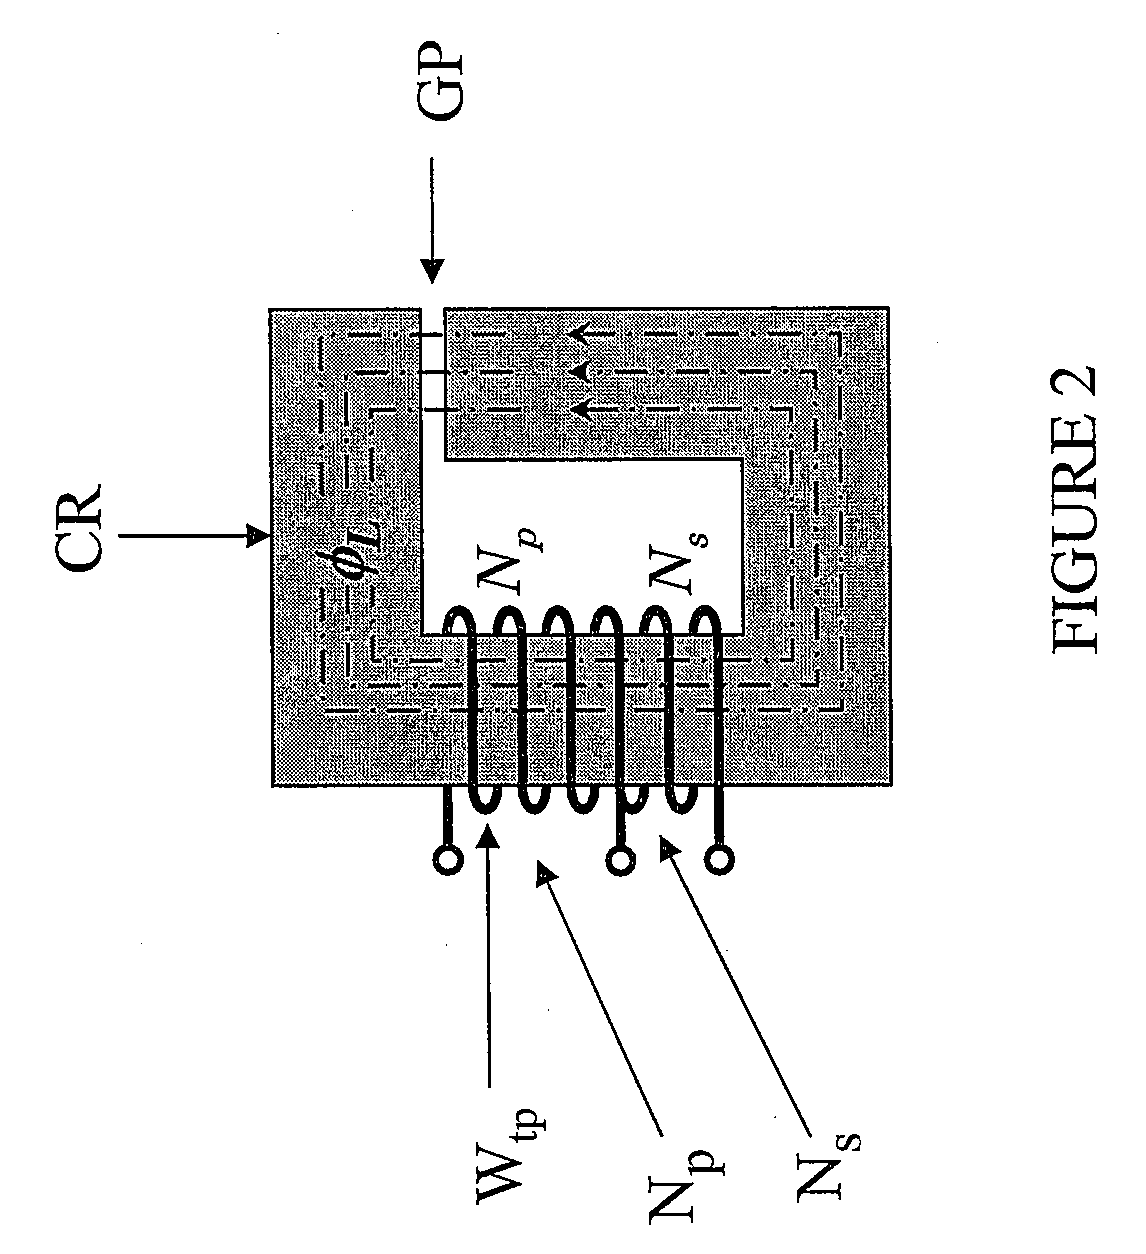 Power Converter Employing a Tapped Inductor and Integrated Magnetics and Method of Operating the Same